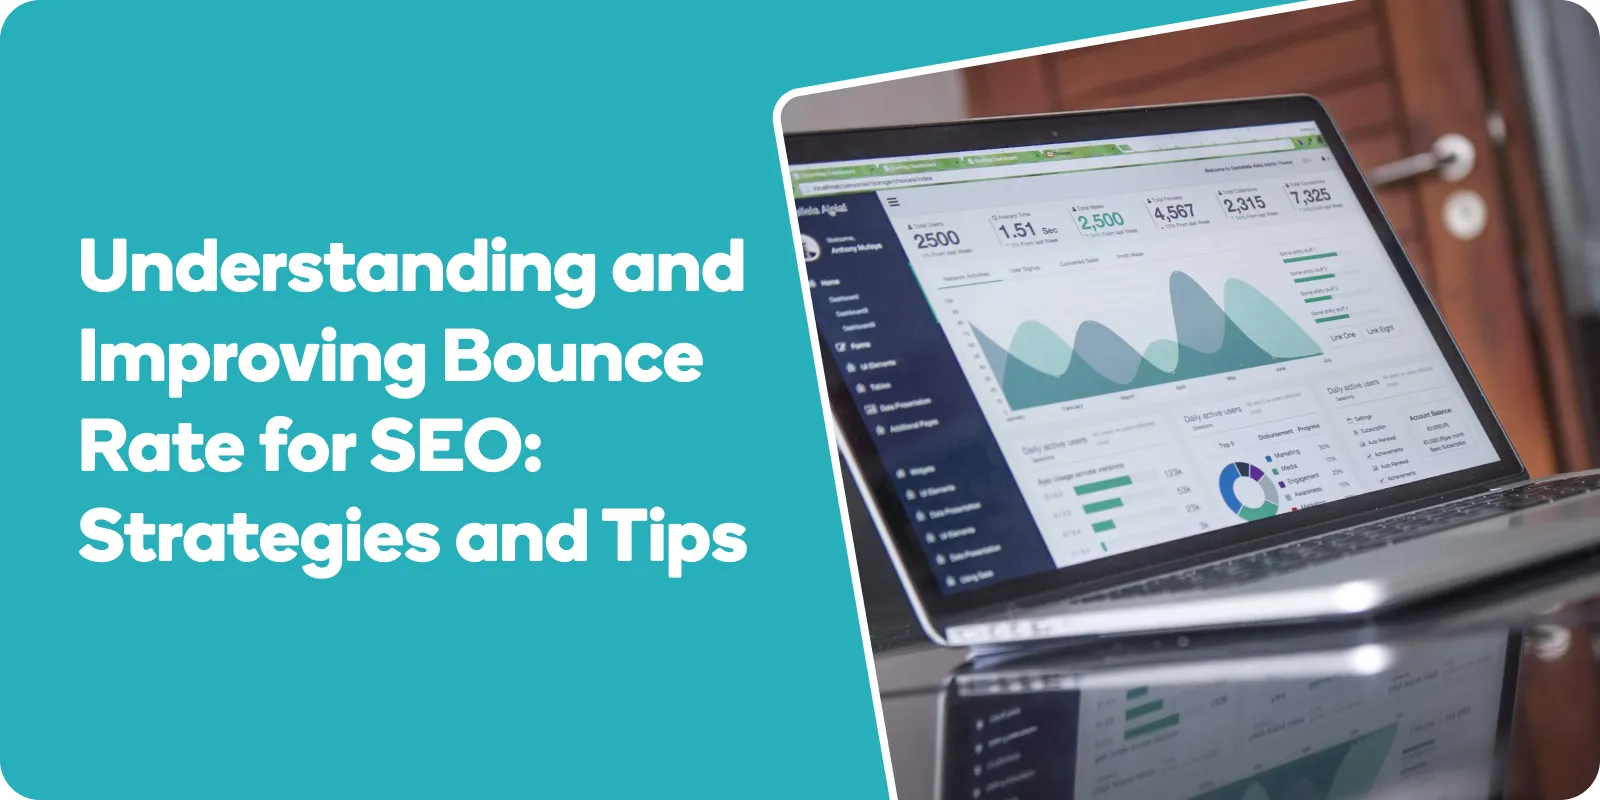 Understanding-and-Improving-Bounce-Rate-for-SEO_-Strategies-and-Tips